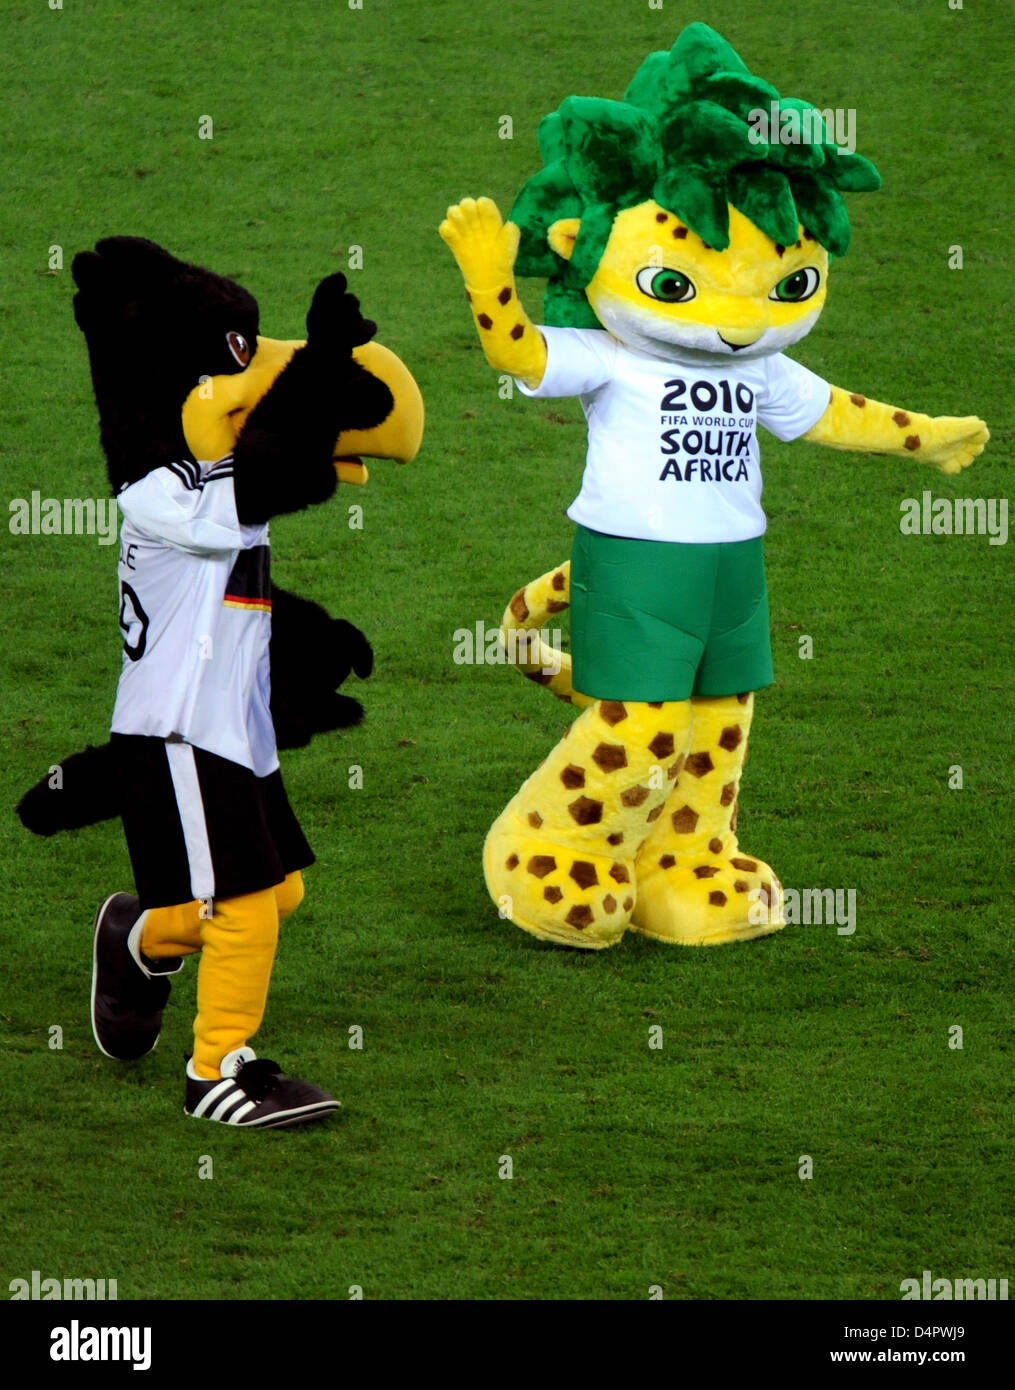 Germany?s national team mascot Paule (L) and Zakumi (R), maascot of the 2010 FIFA World Cup during the friendly match Germany v South Africa at BayArena stadium of Leverkusen, Germany, 05 September 2009. Germany won the match 2-0. Photo: Franz-Peter Tschauner Stock Photo